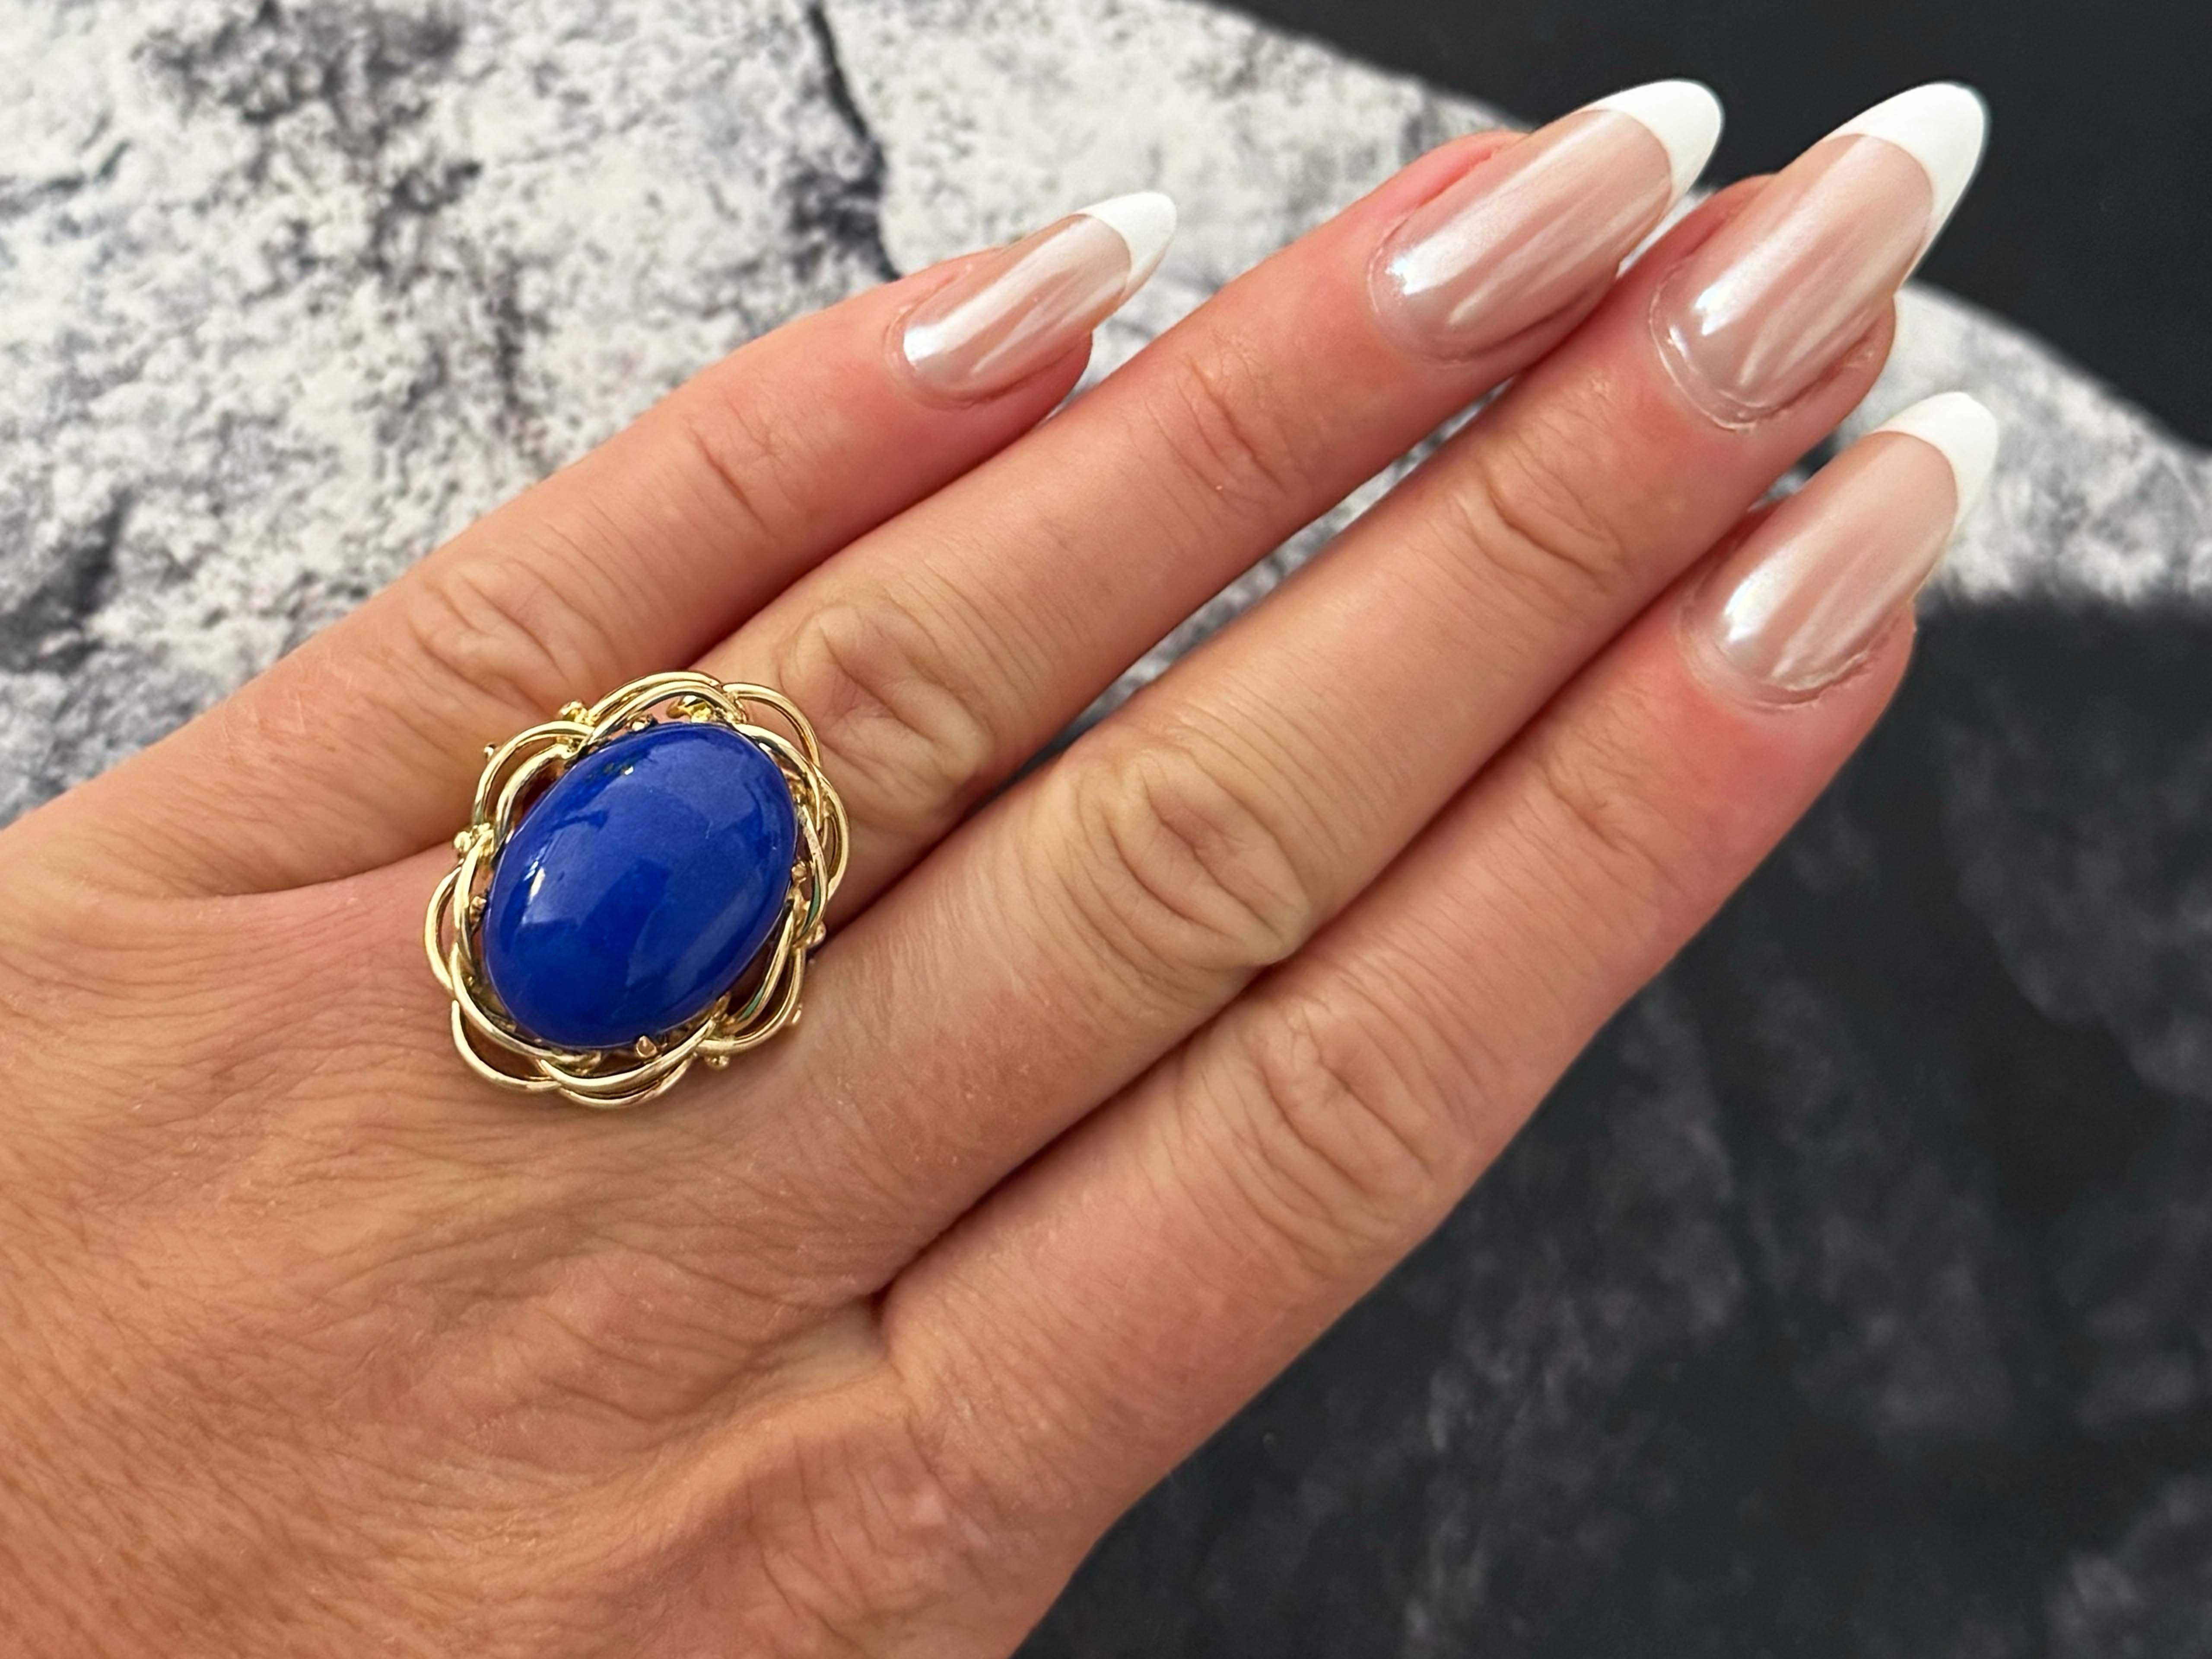 Ring Specifications:

Metal: 14k Yellow Gold

Total Weight: 11.0 Grams

Gemstone: Lapis Lazuli

Lapis Lazuli Measurements: ~20.4 mm x  15 mm x 7.1 mm

Ring Size: 6.25 (resizable)

Stamped: 